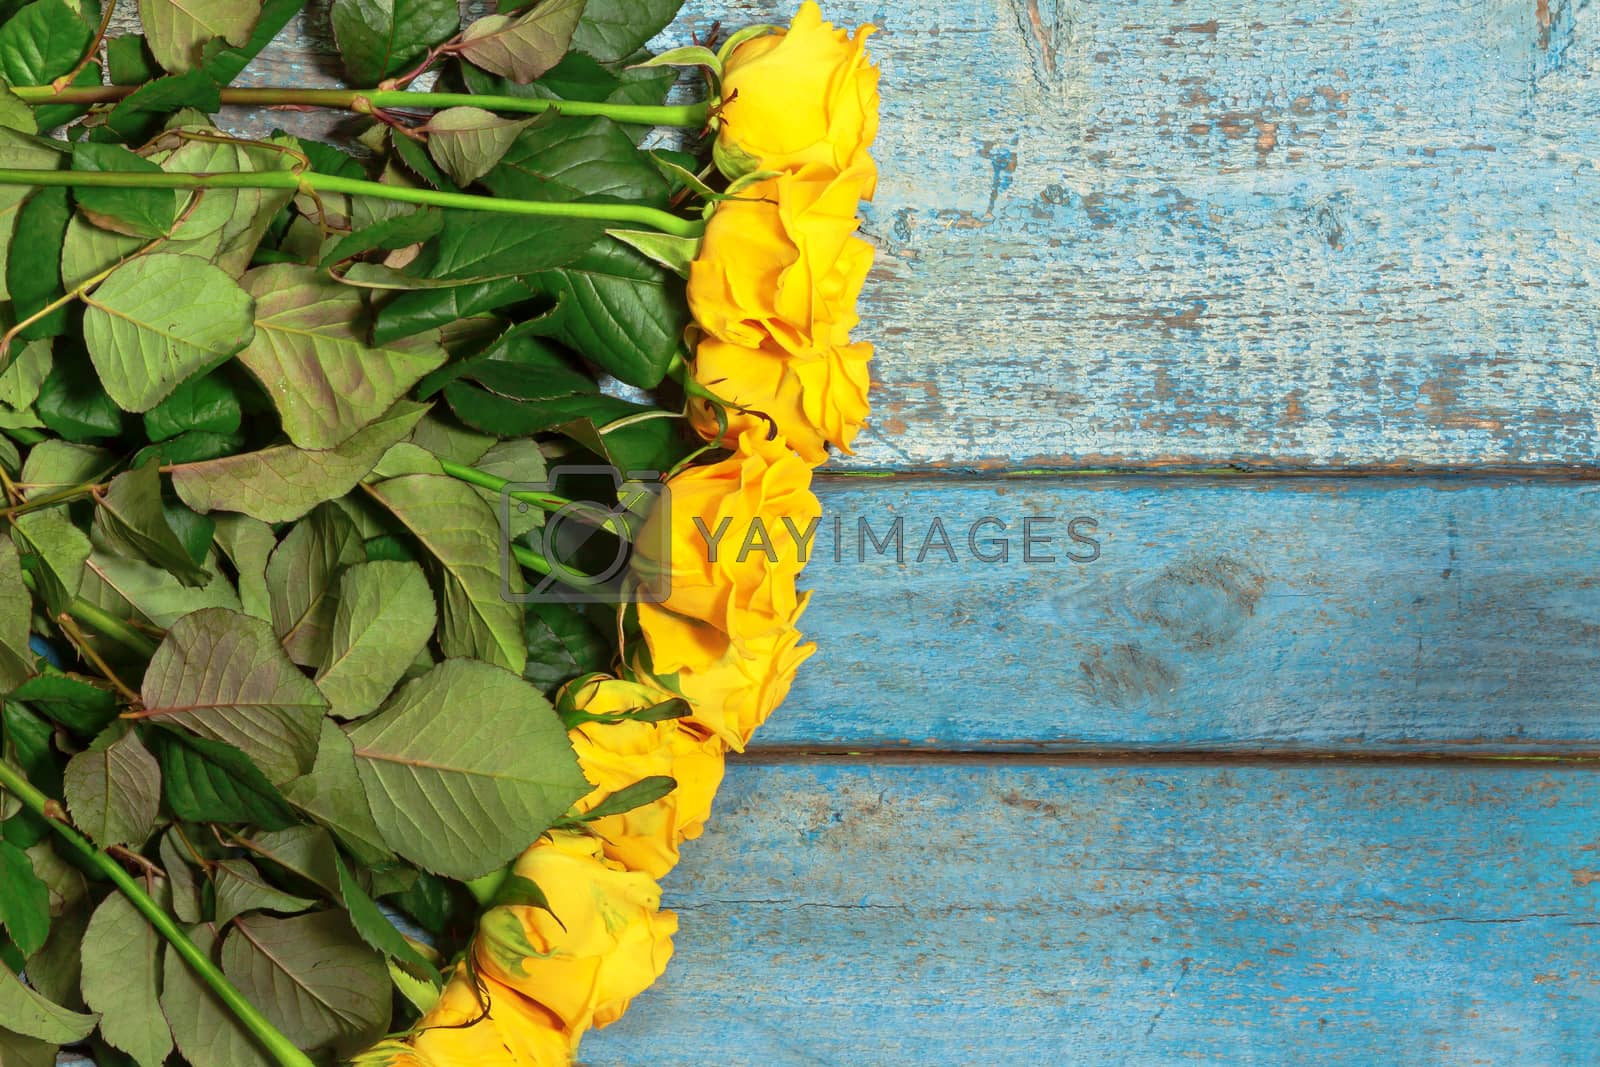 Royalty free image of lot of yellow roses on a blue wooden background by Tanacha